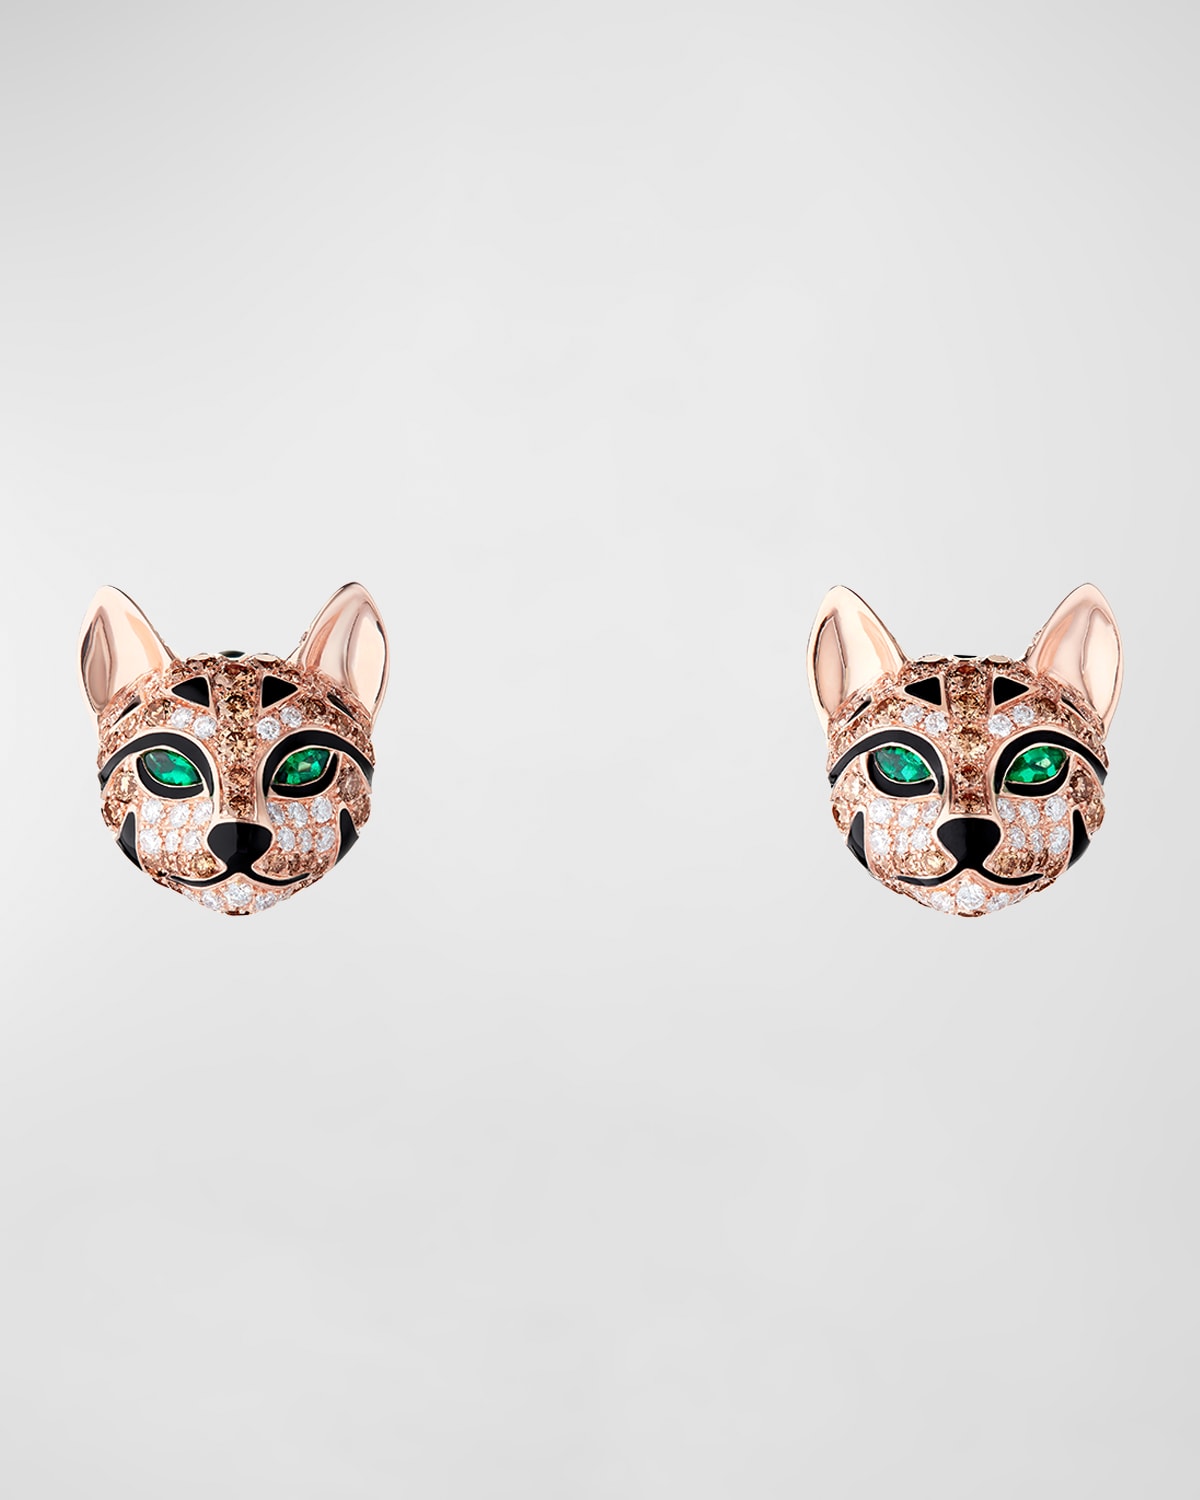 Boucheron Pink Gold Fuzzy, the Leopard Stud Earrings with Diamonds and Emeralds